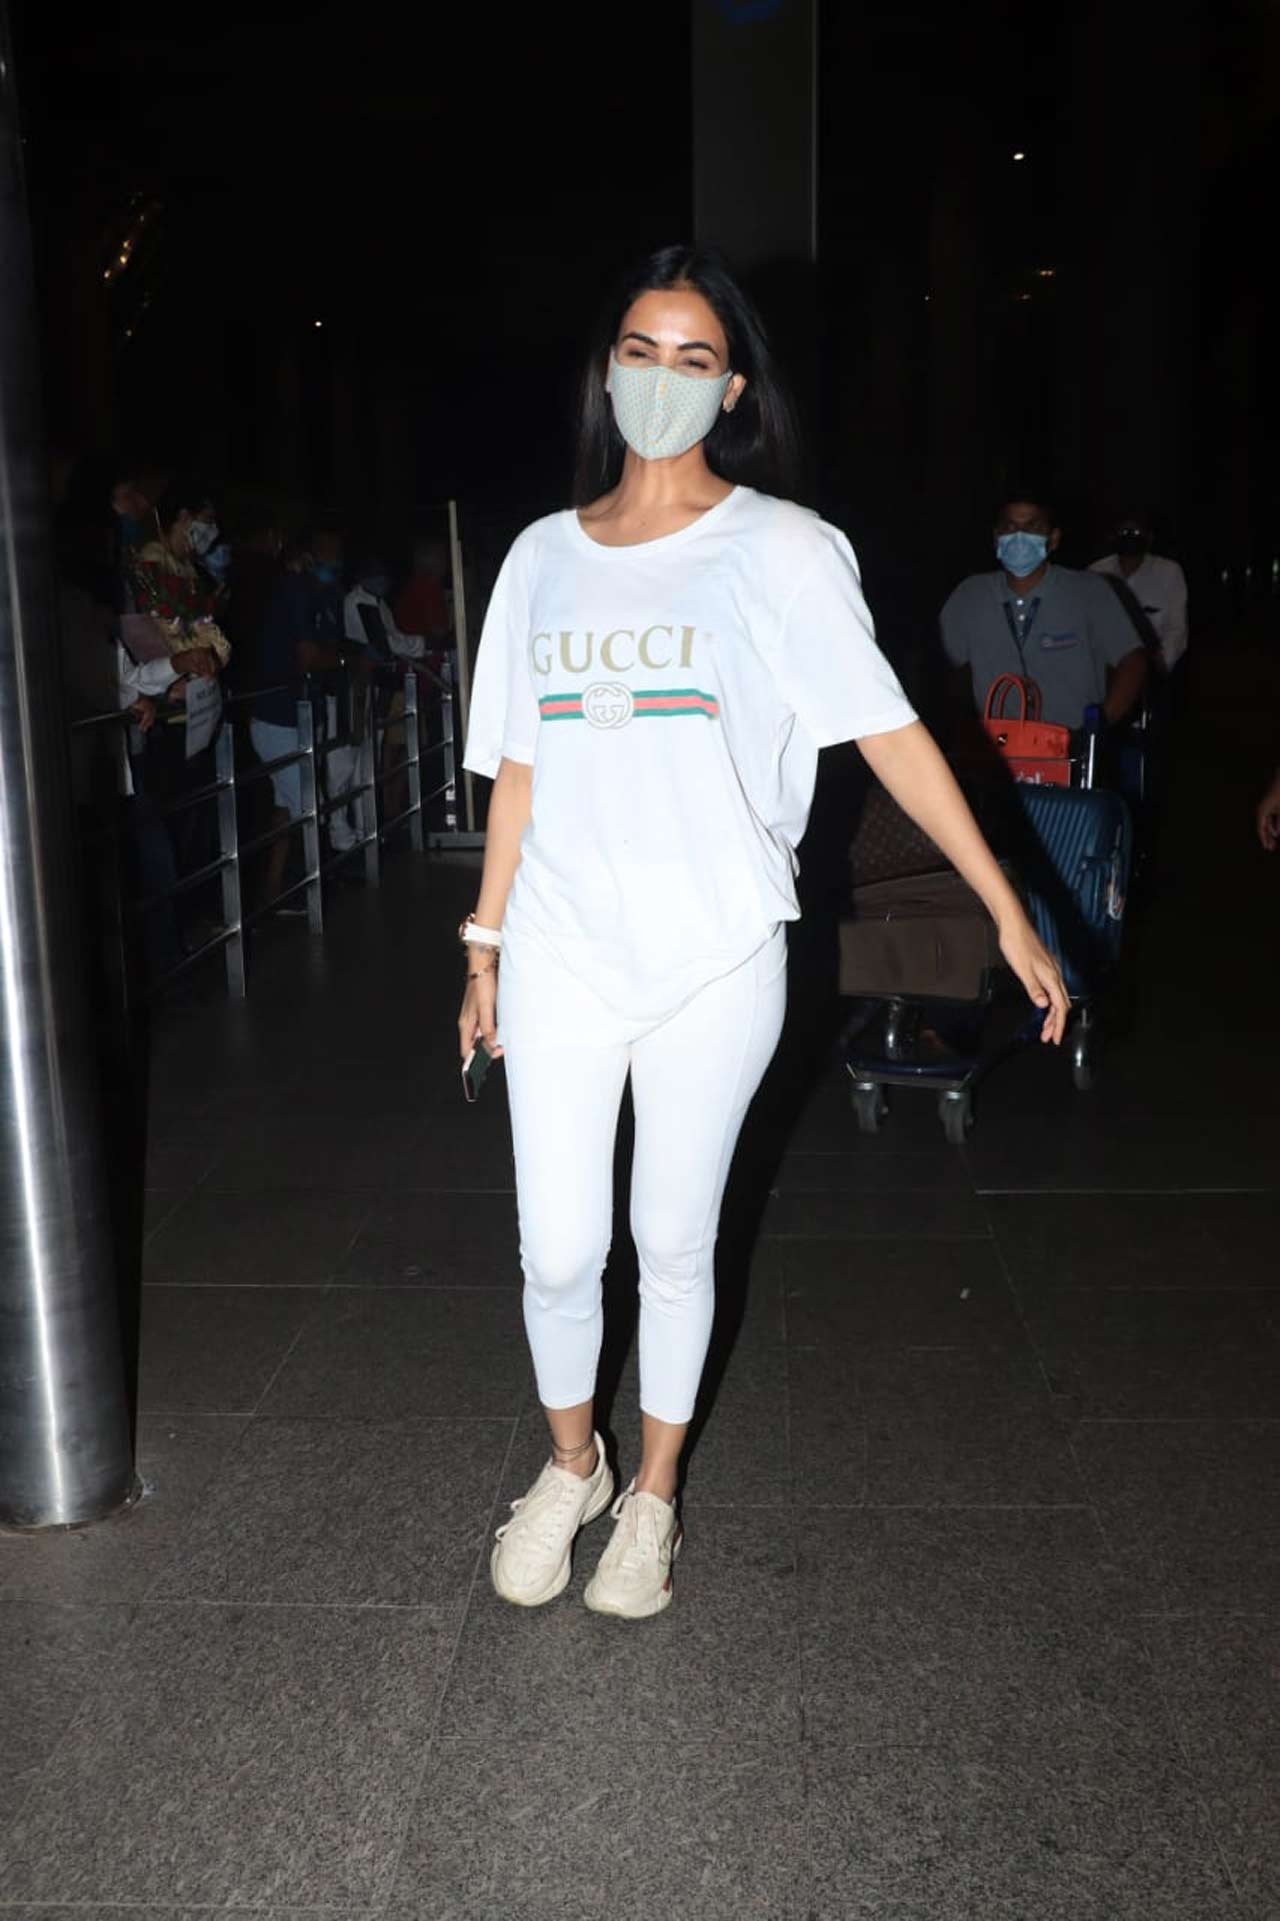 Sonal Chauhan was also spotted in an all-white casual outfit at the Mumbai airport.